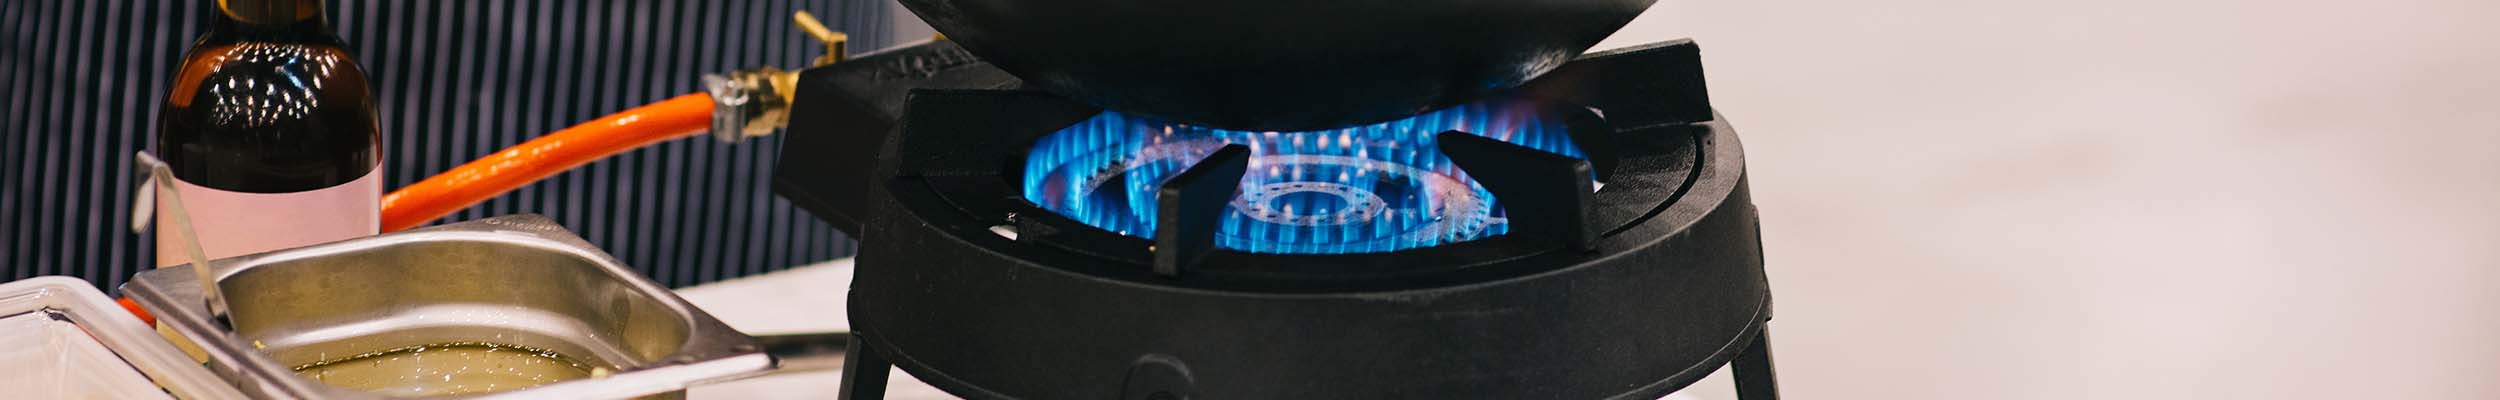 Durable outdoor wok burner on stand with blue flames